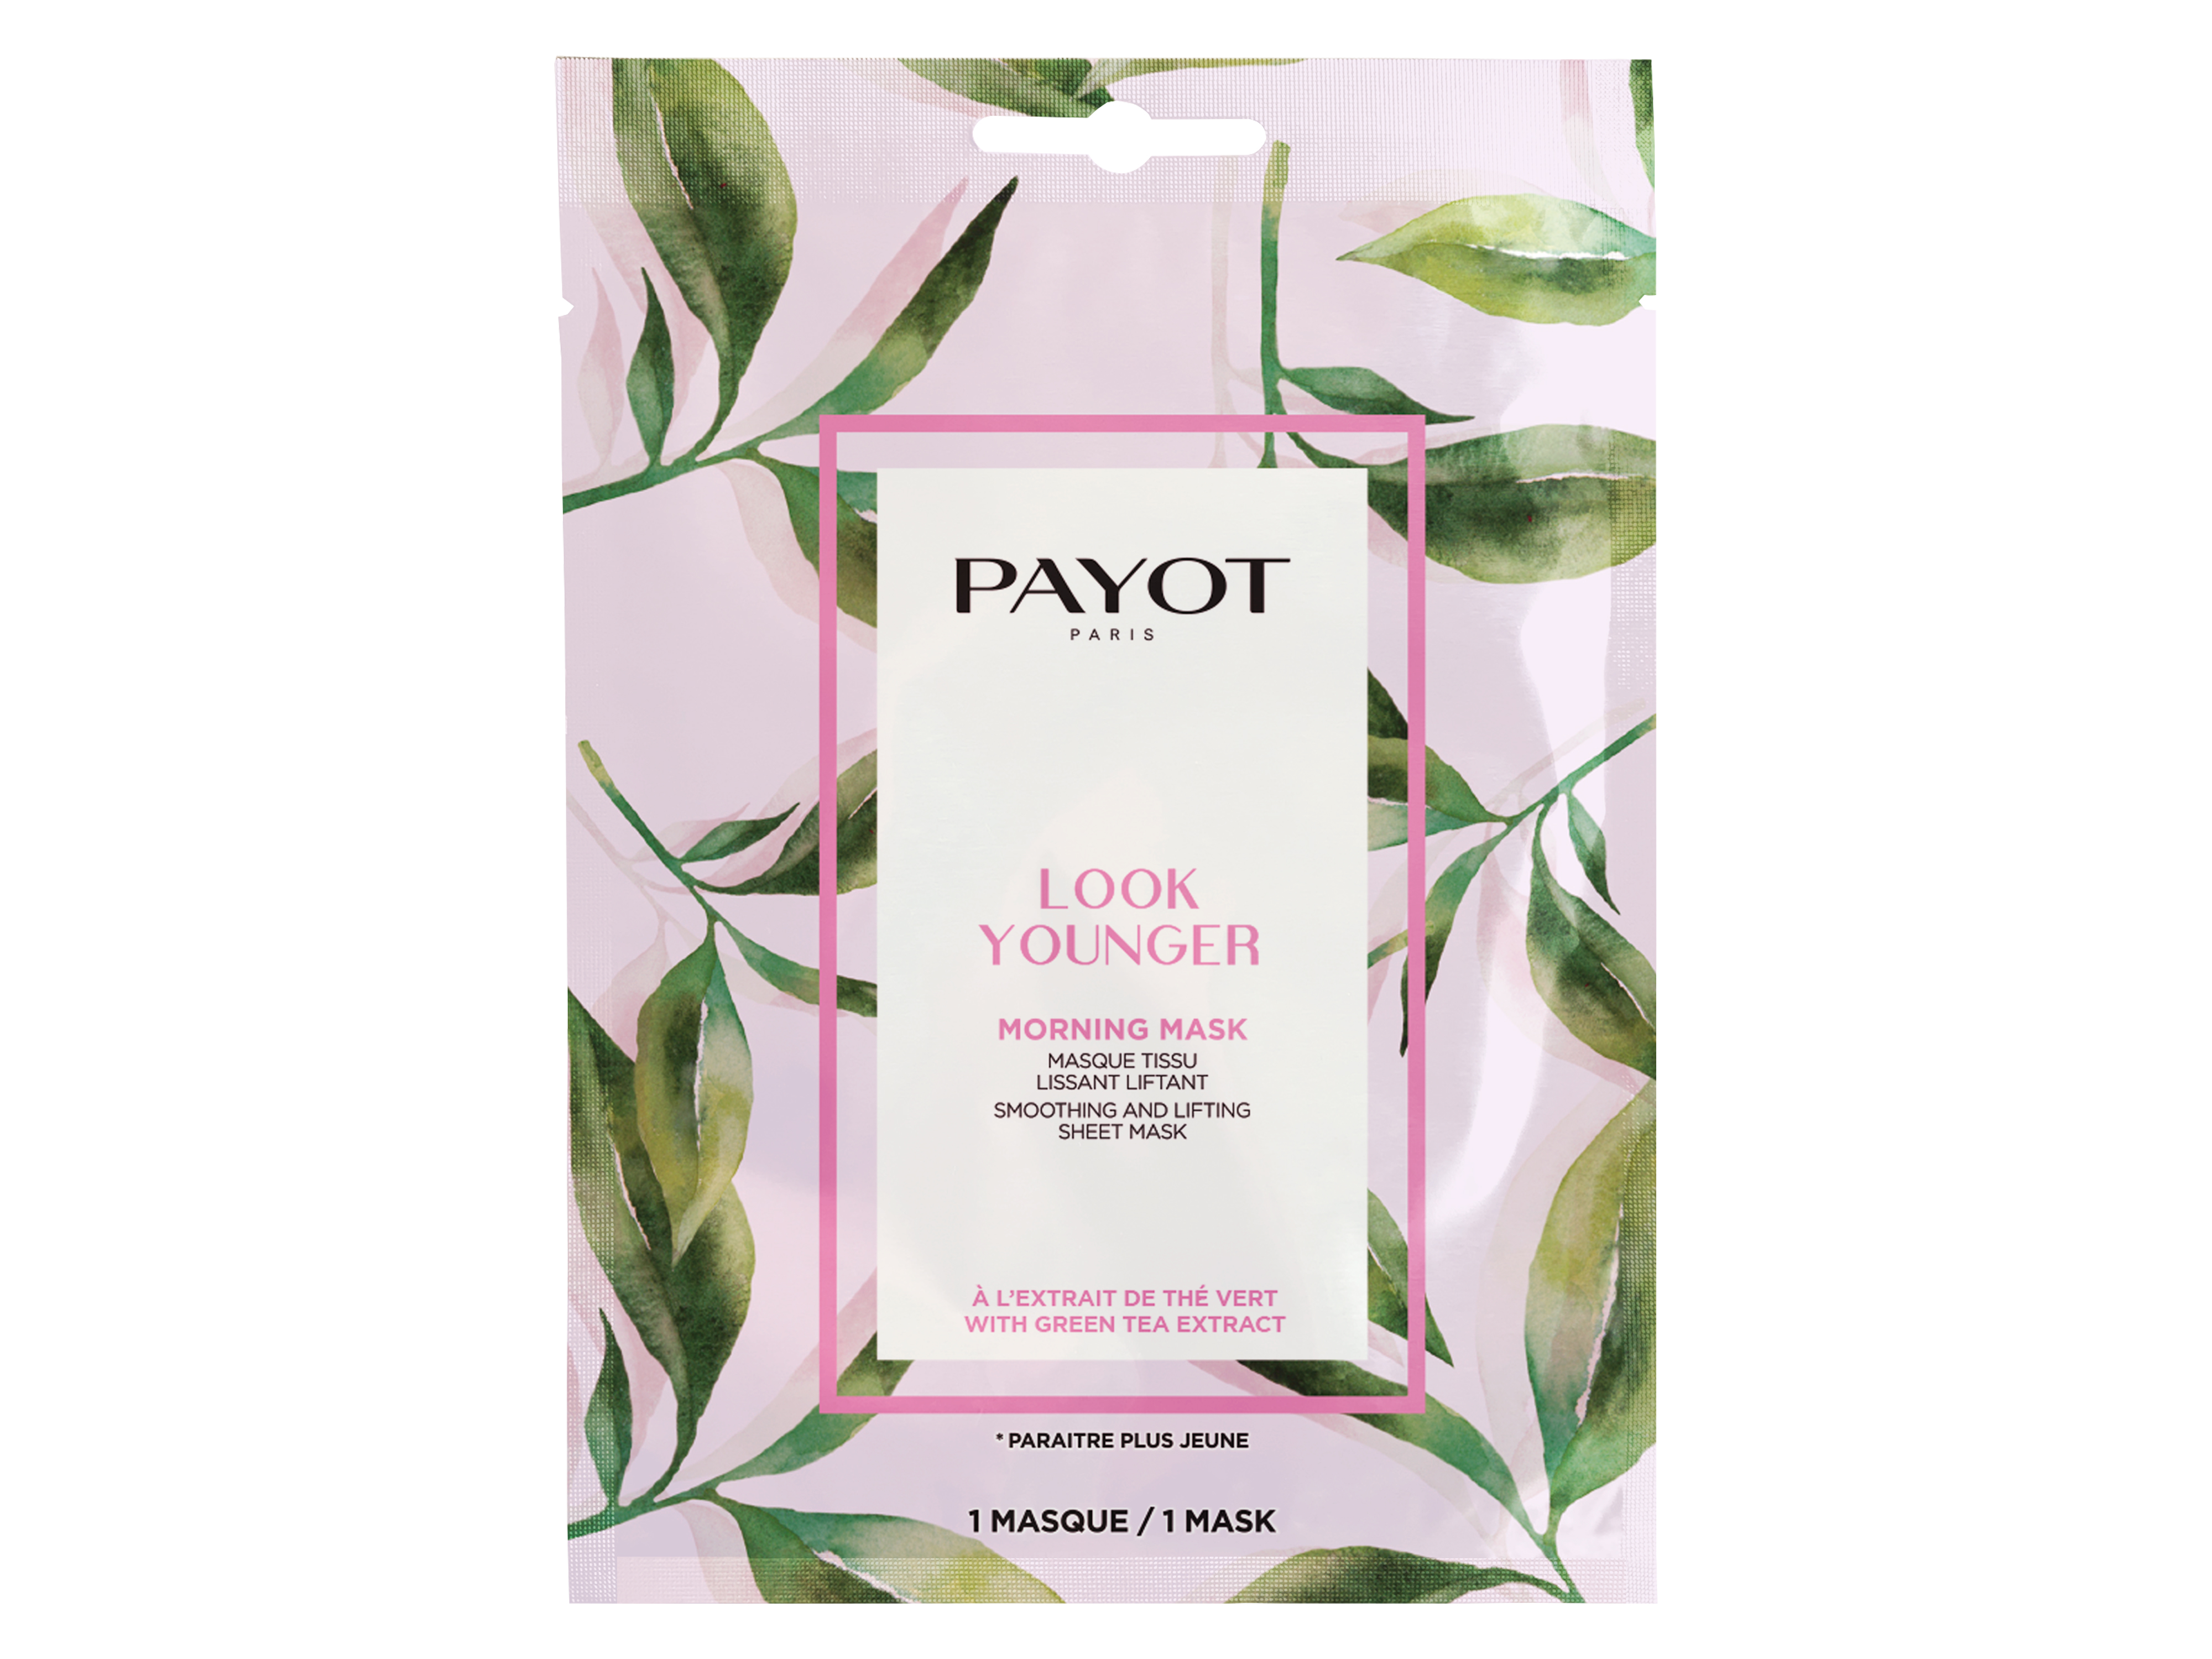 Payot Morning Mask Look Younger, 1 stk., 19 ml